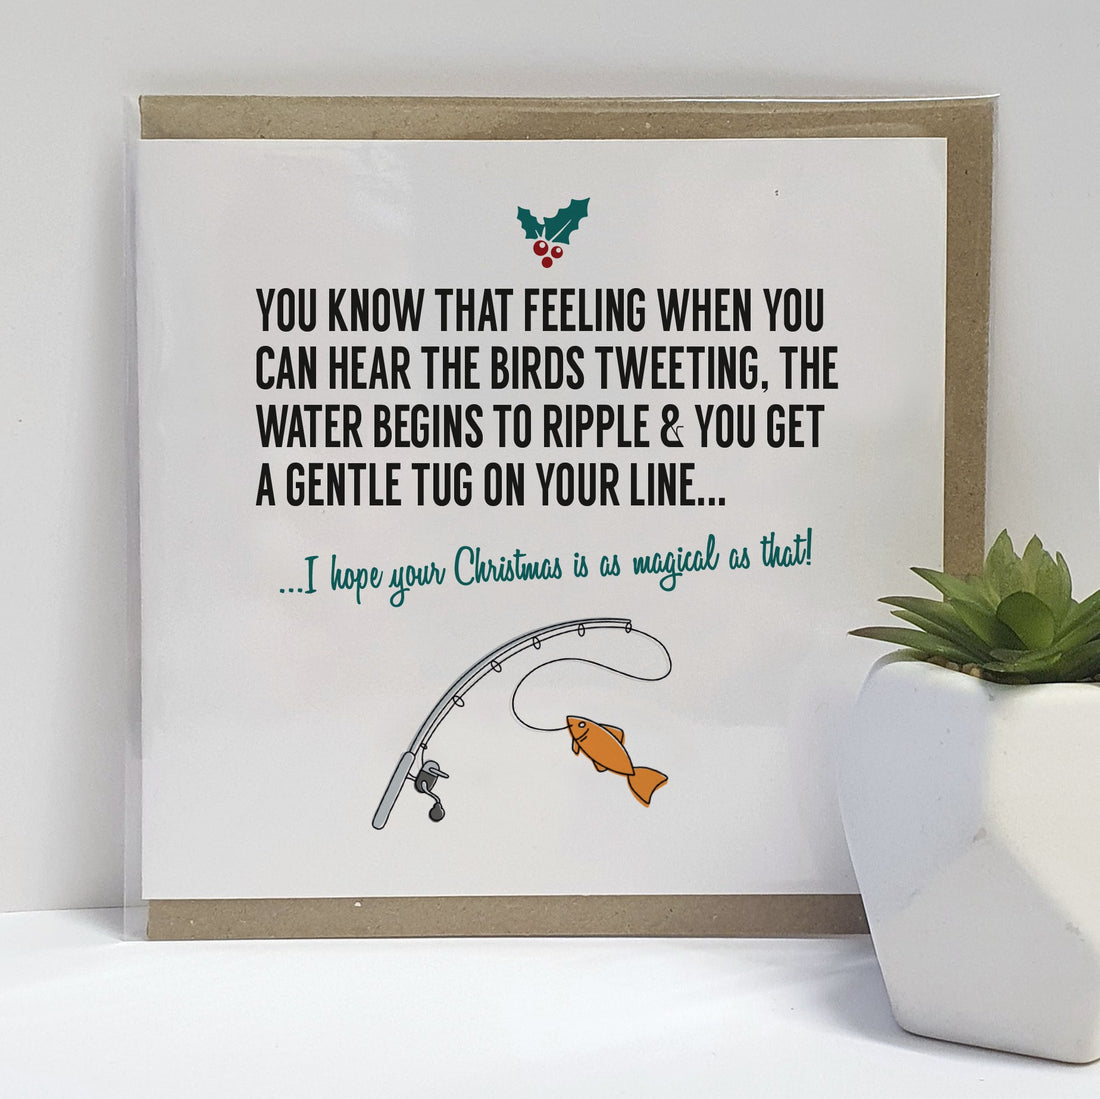 A unique fishing themed Christmas card, designed & printed on high quality card stock.    Card reads:   You know that feeling when you can hear the birds tweeting, the water begins to ripple & you get a gentle tug on your line...  I hope your Christmas is as magical as that